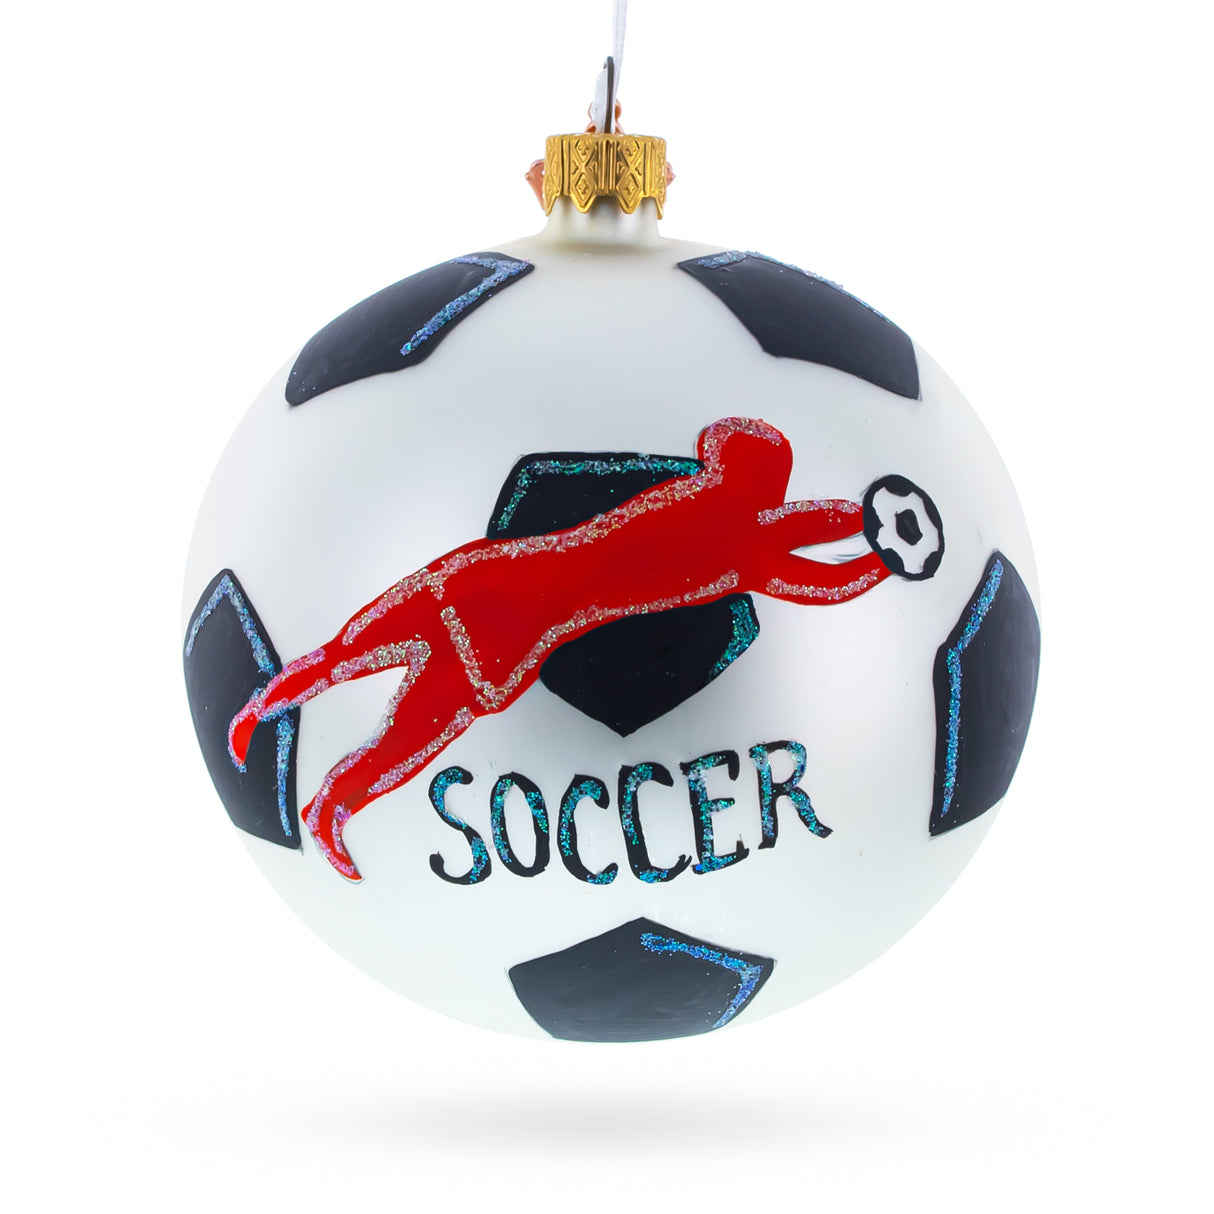 Goal Scorer: Soccer Player in Action Blown Glass Ball Christmas Sports Ornament 4 Inches in Multi color, Round shape